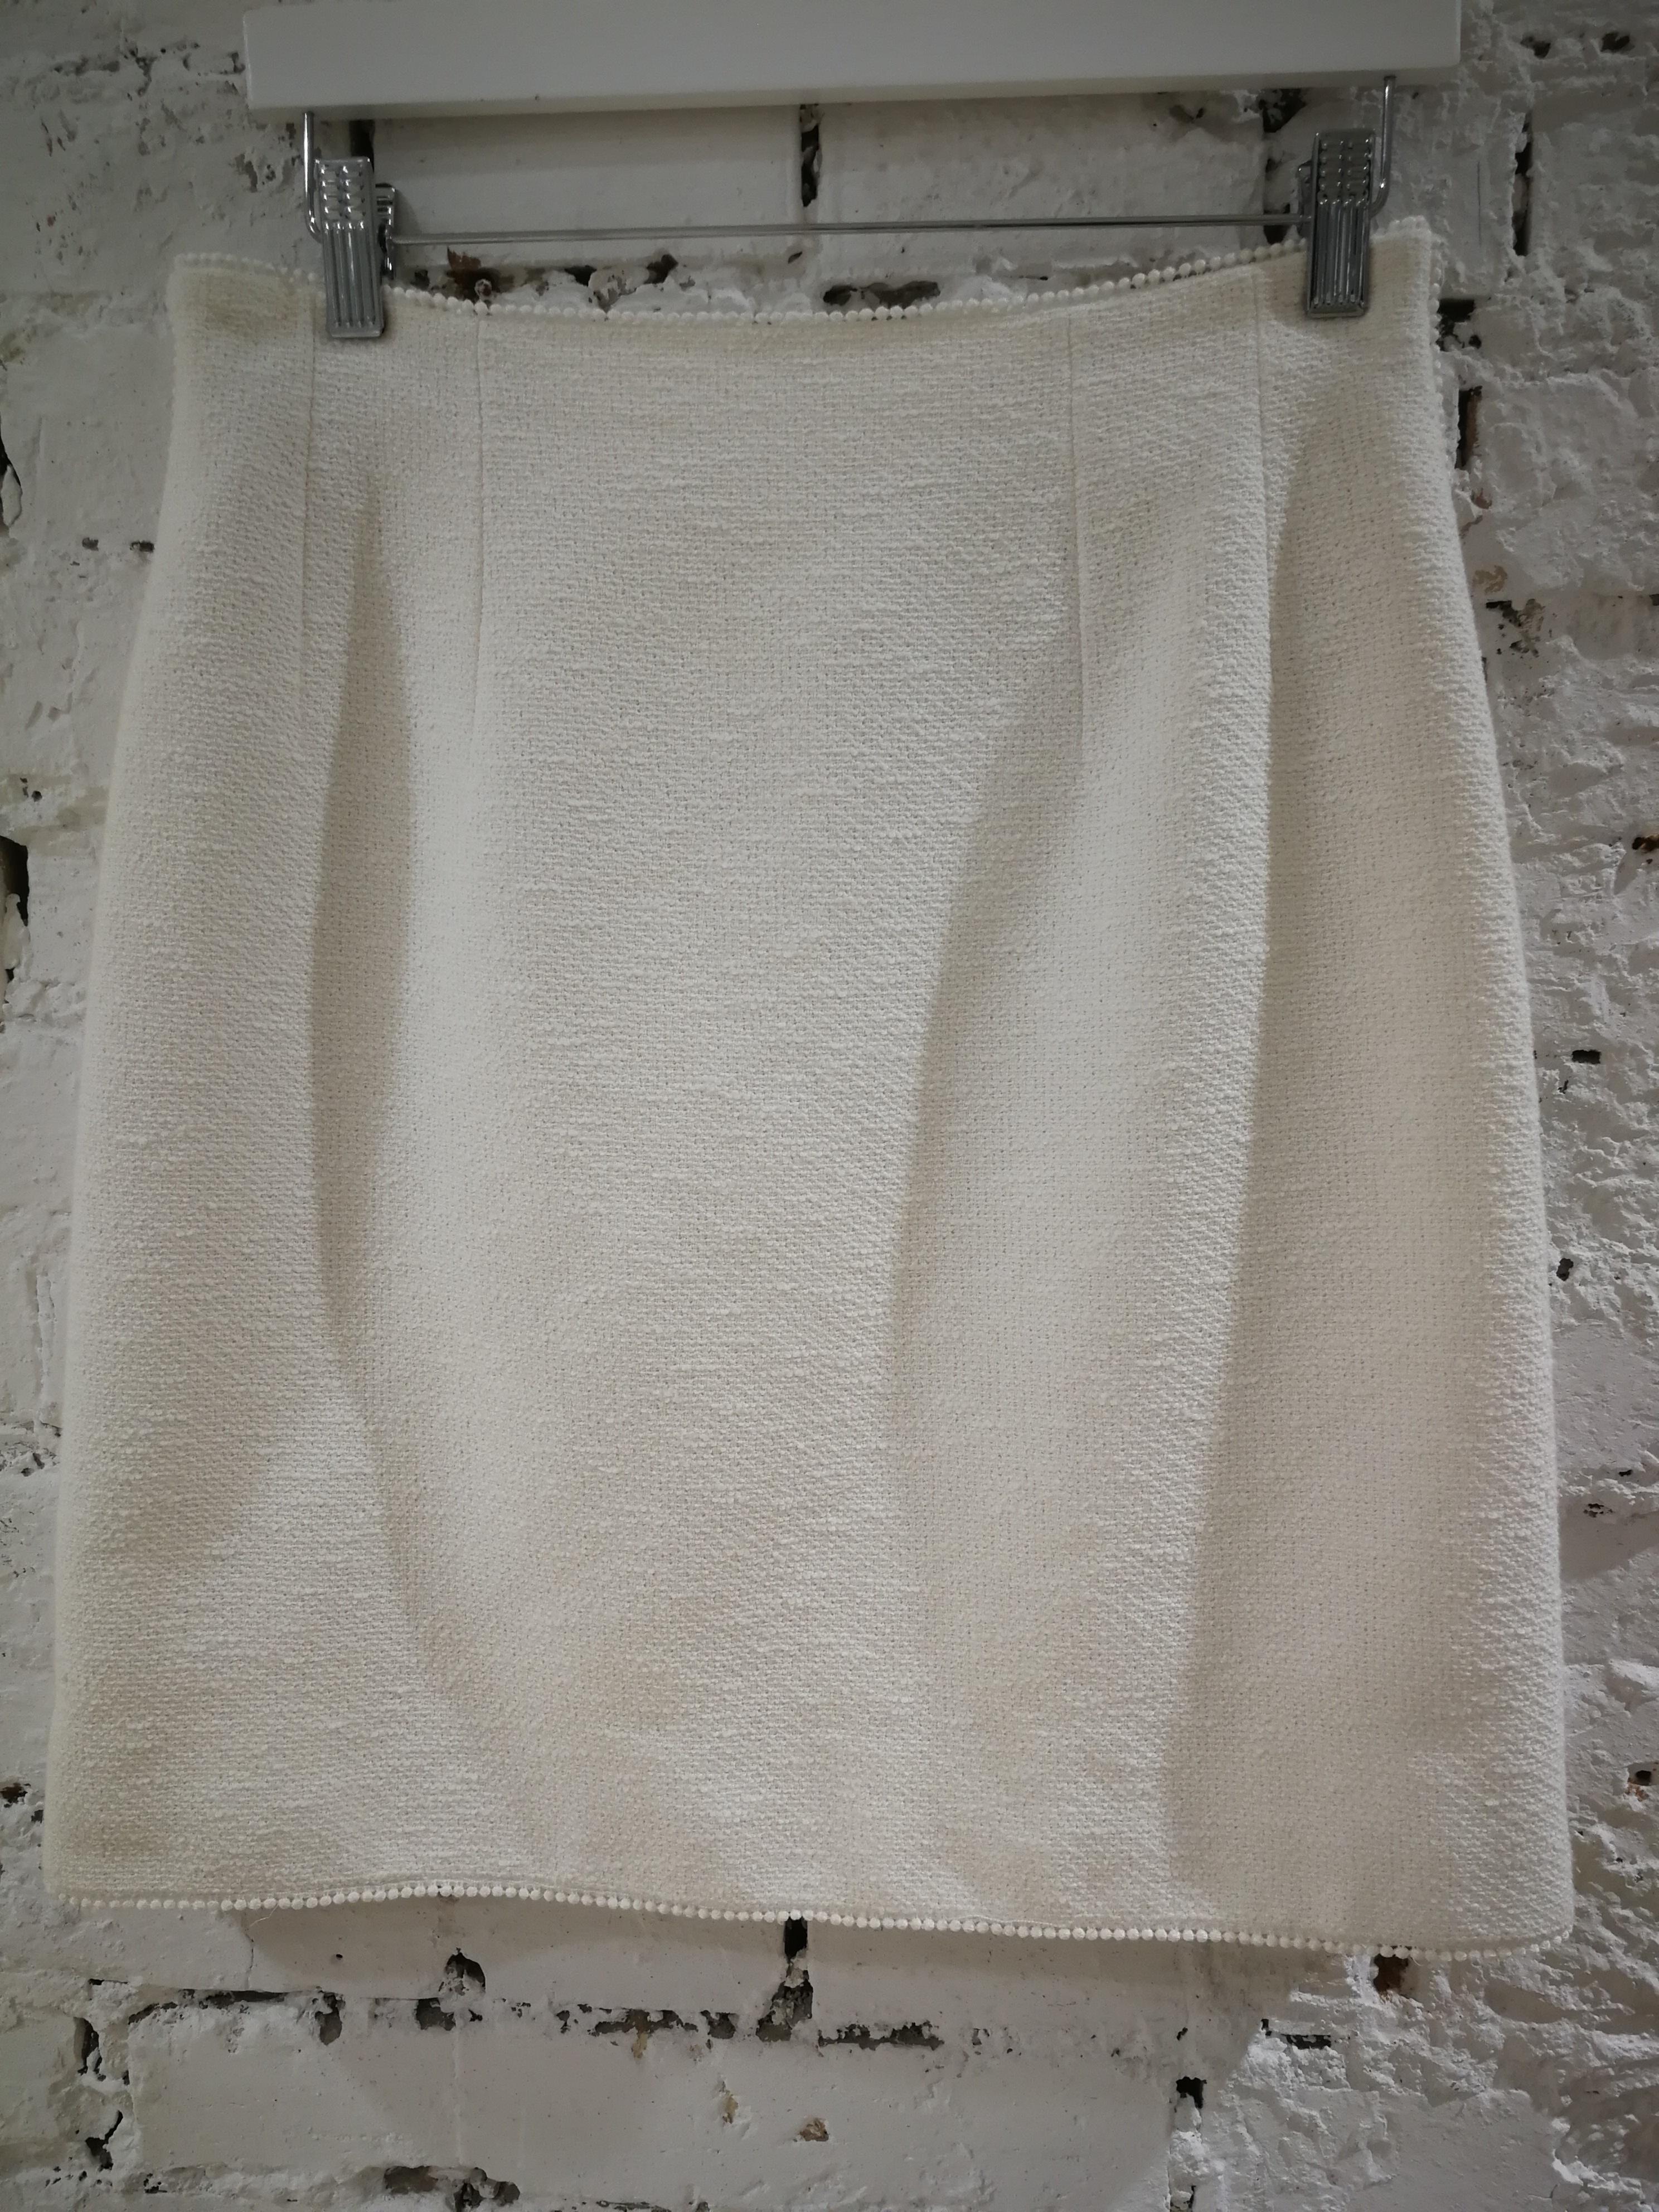 Chanel Boutique Cotton Skirt
Totally made in france in size 42
